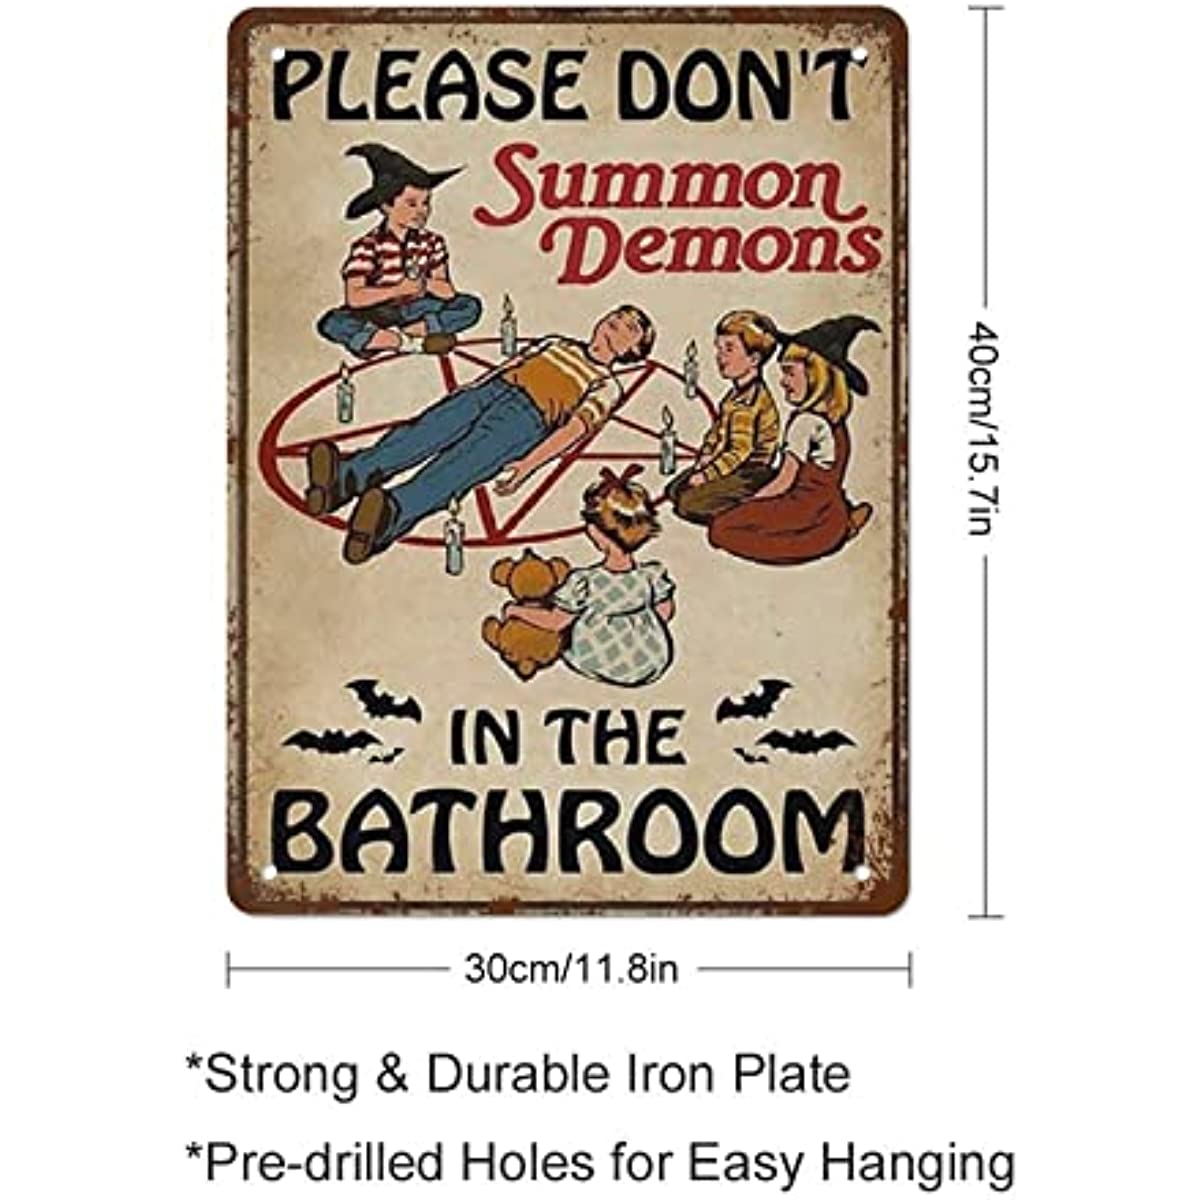 Please Don't Summon Demons in The Bathroom Metal Sign - Mystical Rose Gems